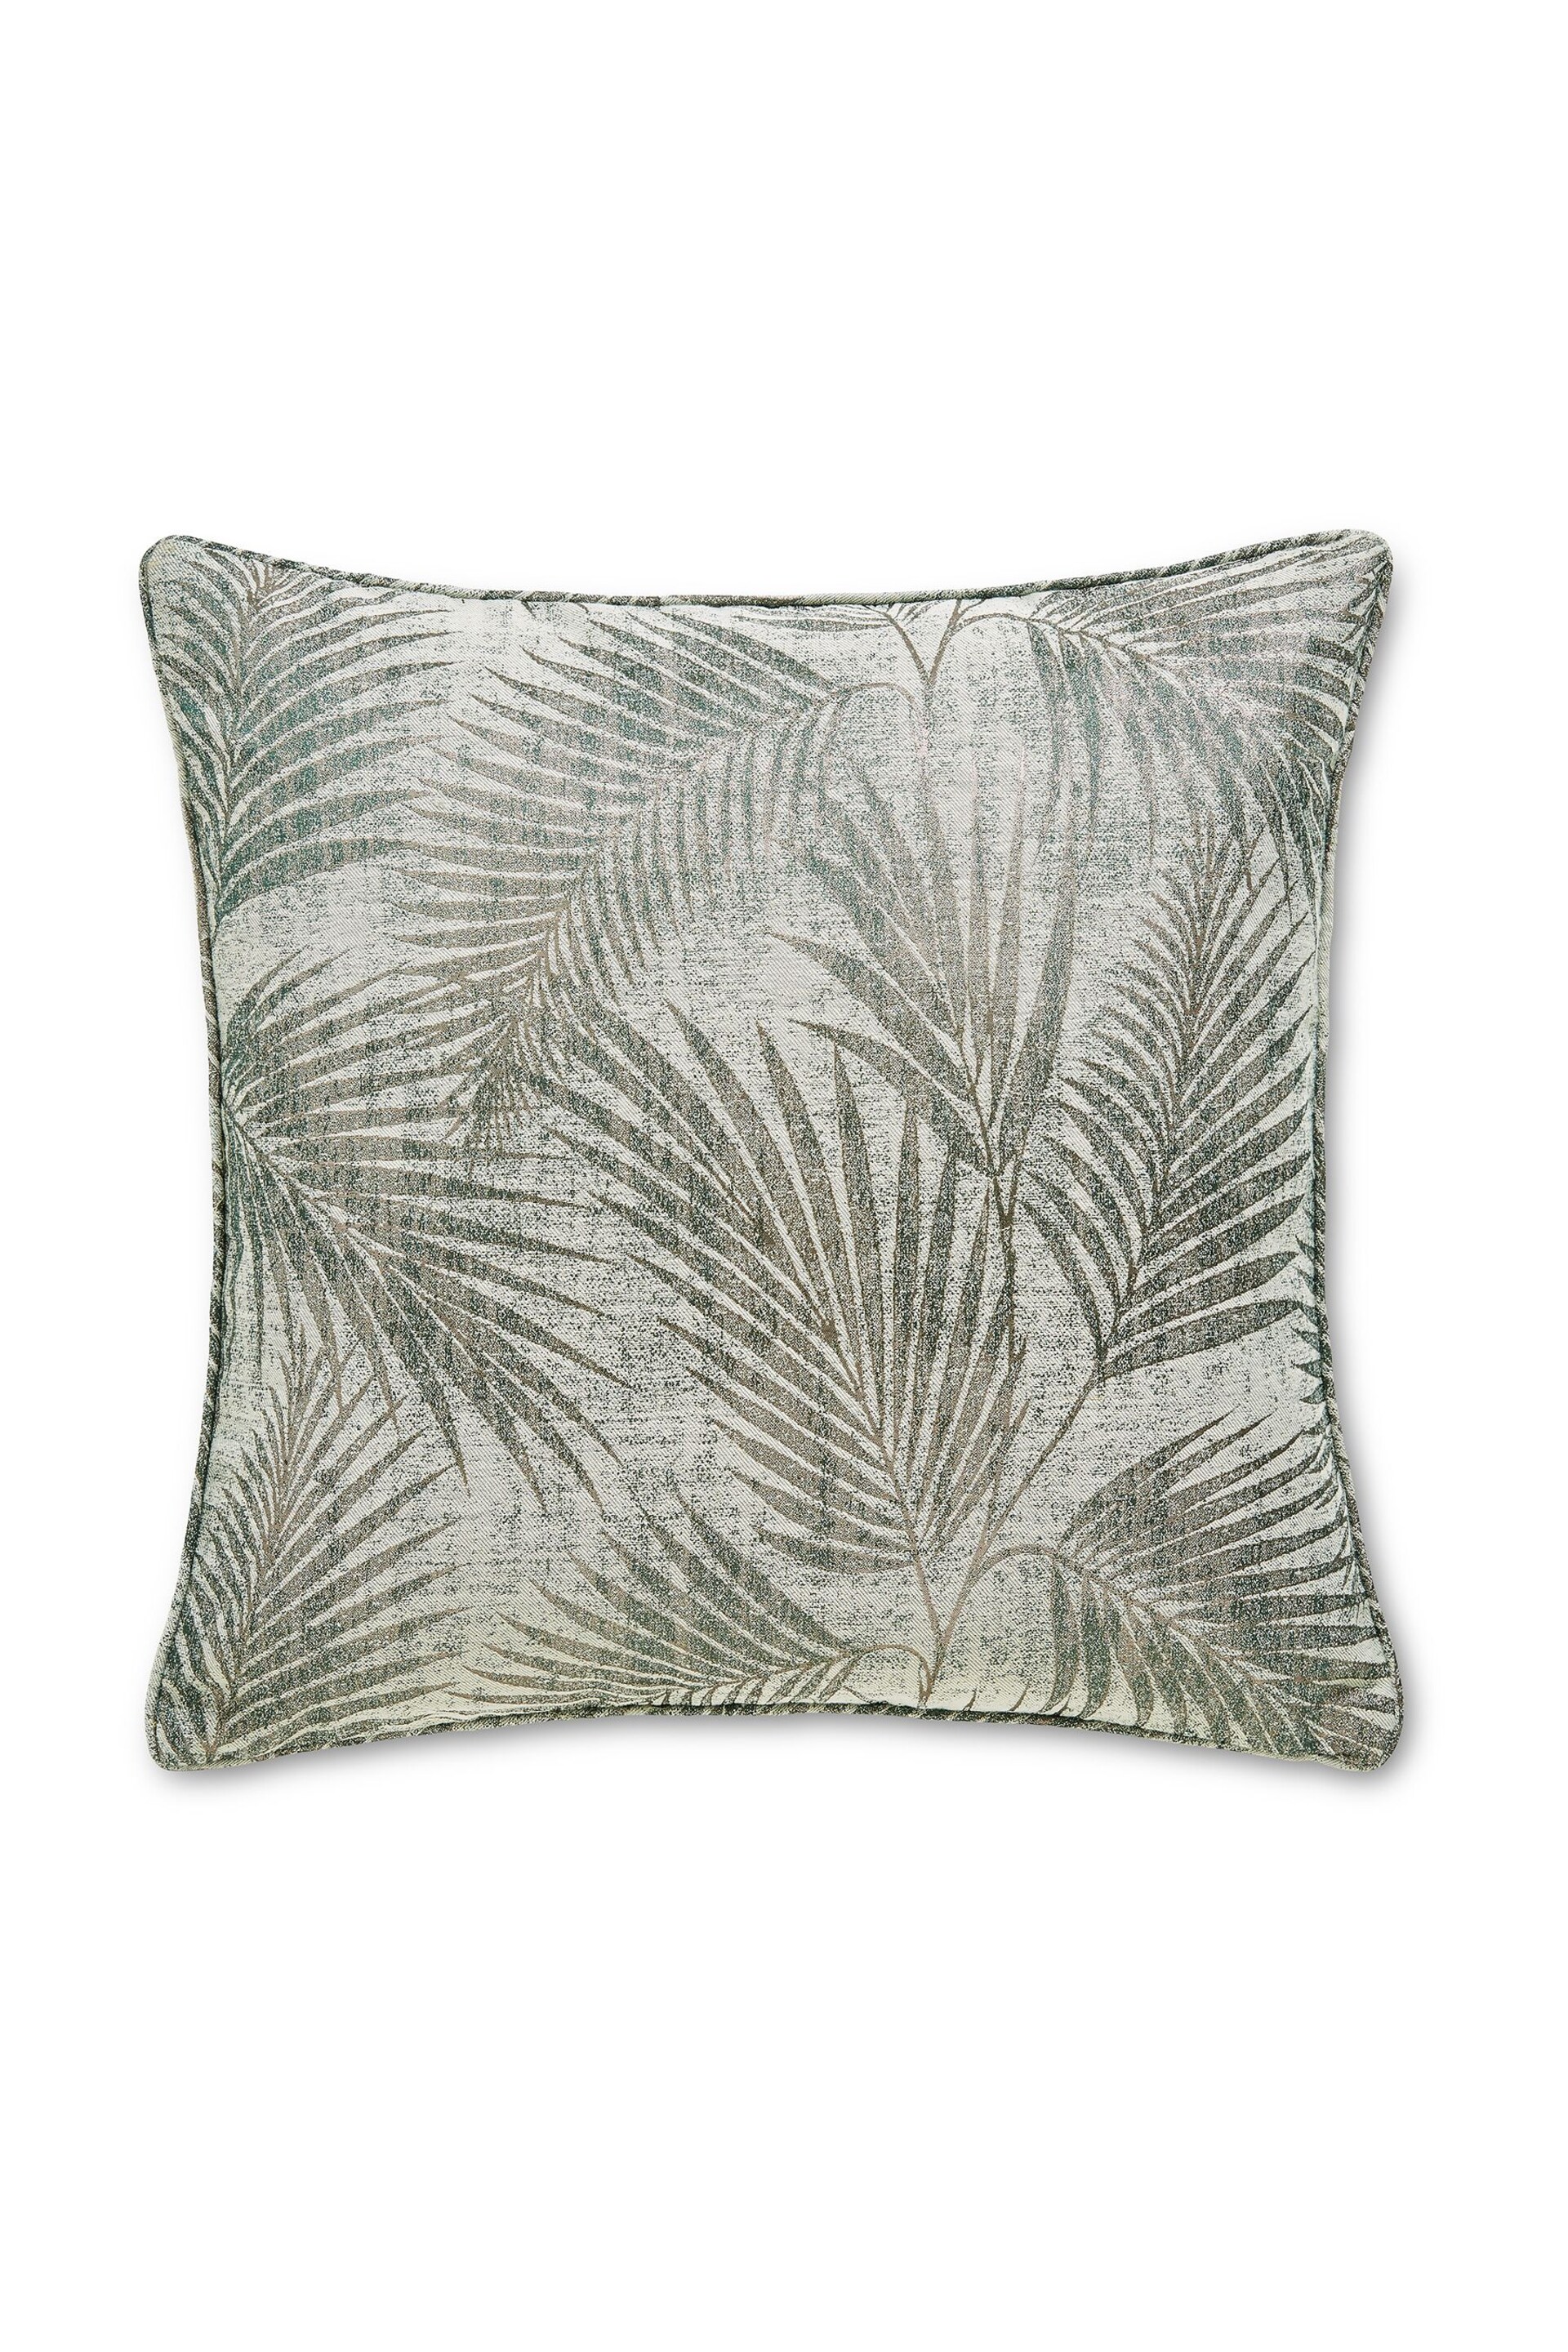 Hyperion Green Tamra Palm Piped Cushion - Image 3 of 3